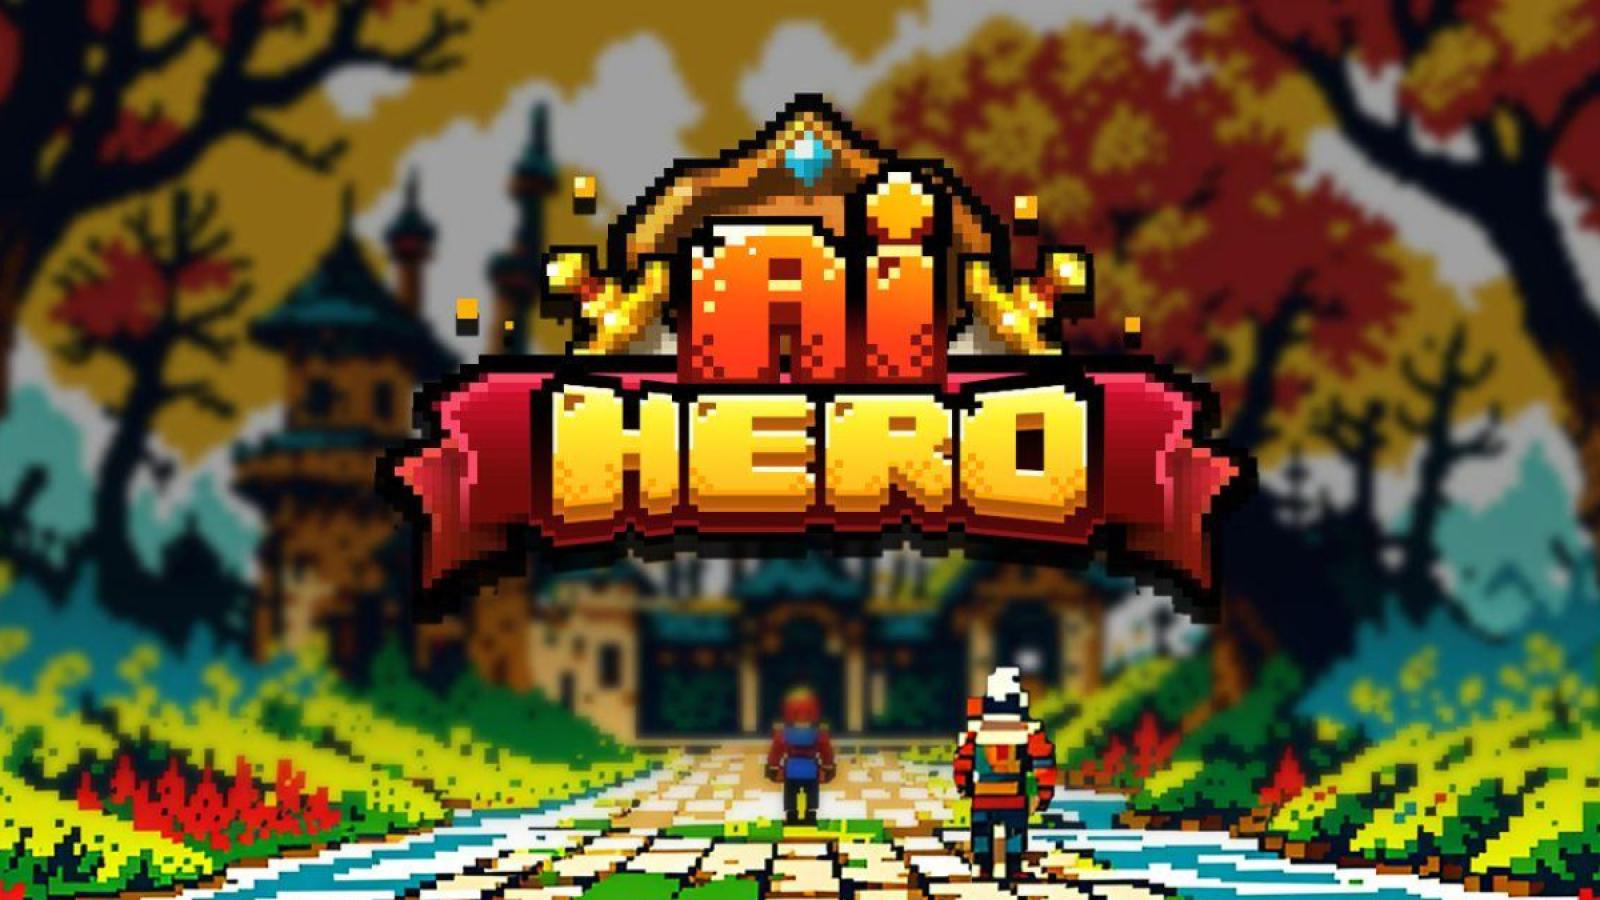 BinaryX Launches AI Chat Game ‘AI Hero’ With Limited NFT Mints